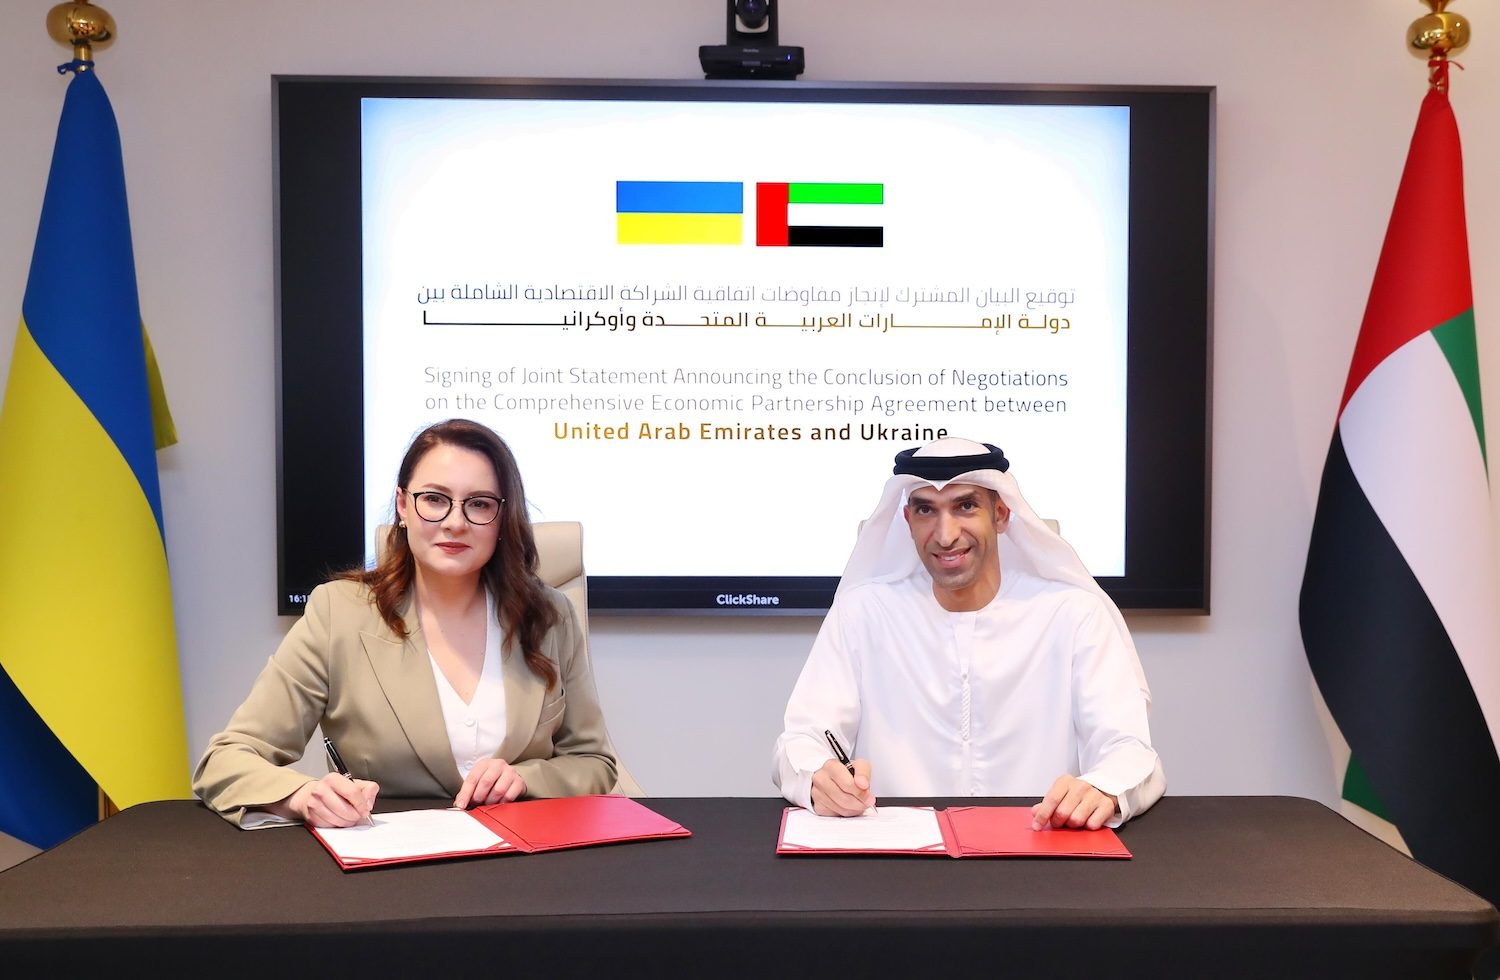 UAE Ukraine cepa Yulia Svyrydenko, Ukraine’s minister of economic development and trade, and Dr Thani bin Ahmed Al Zeyoudi, the UAE’s minister of state for foreign trade, sign the deal between the two countries